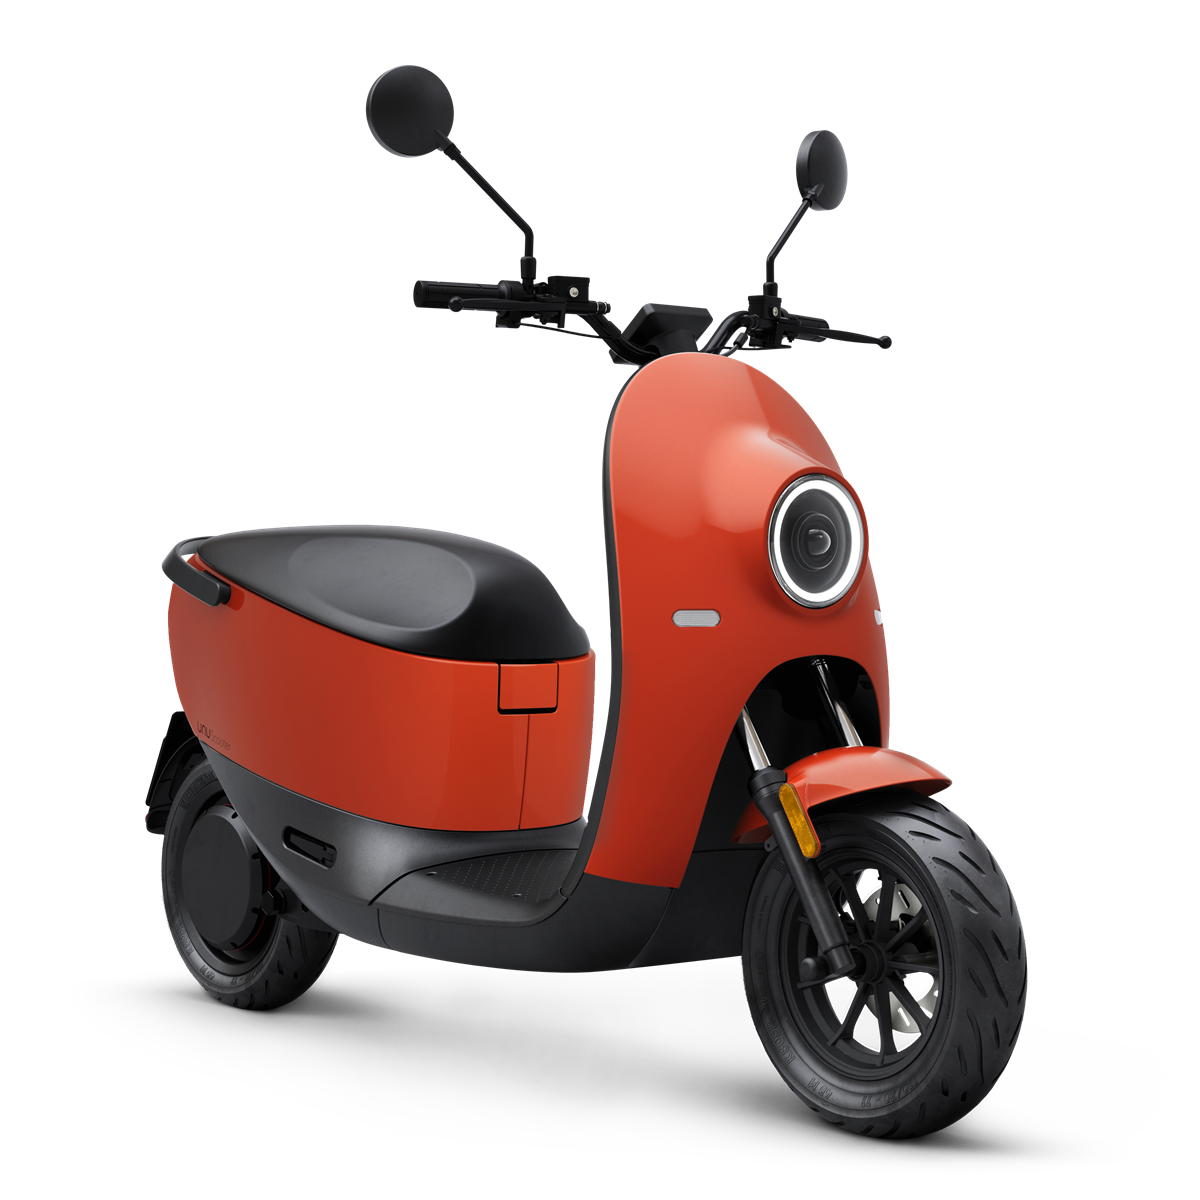 unu Scooter_Cutout_Red Glossy_ab EUR 2.799